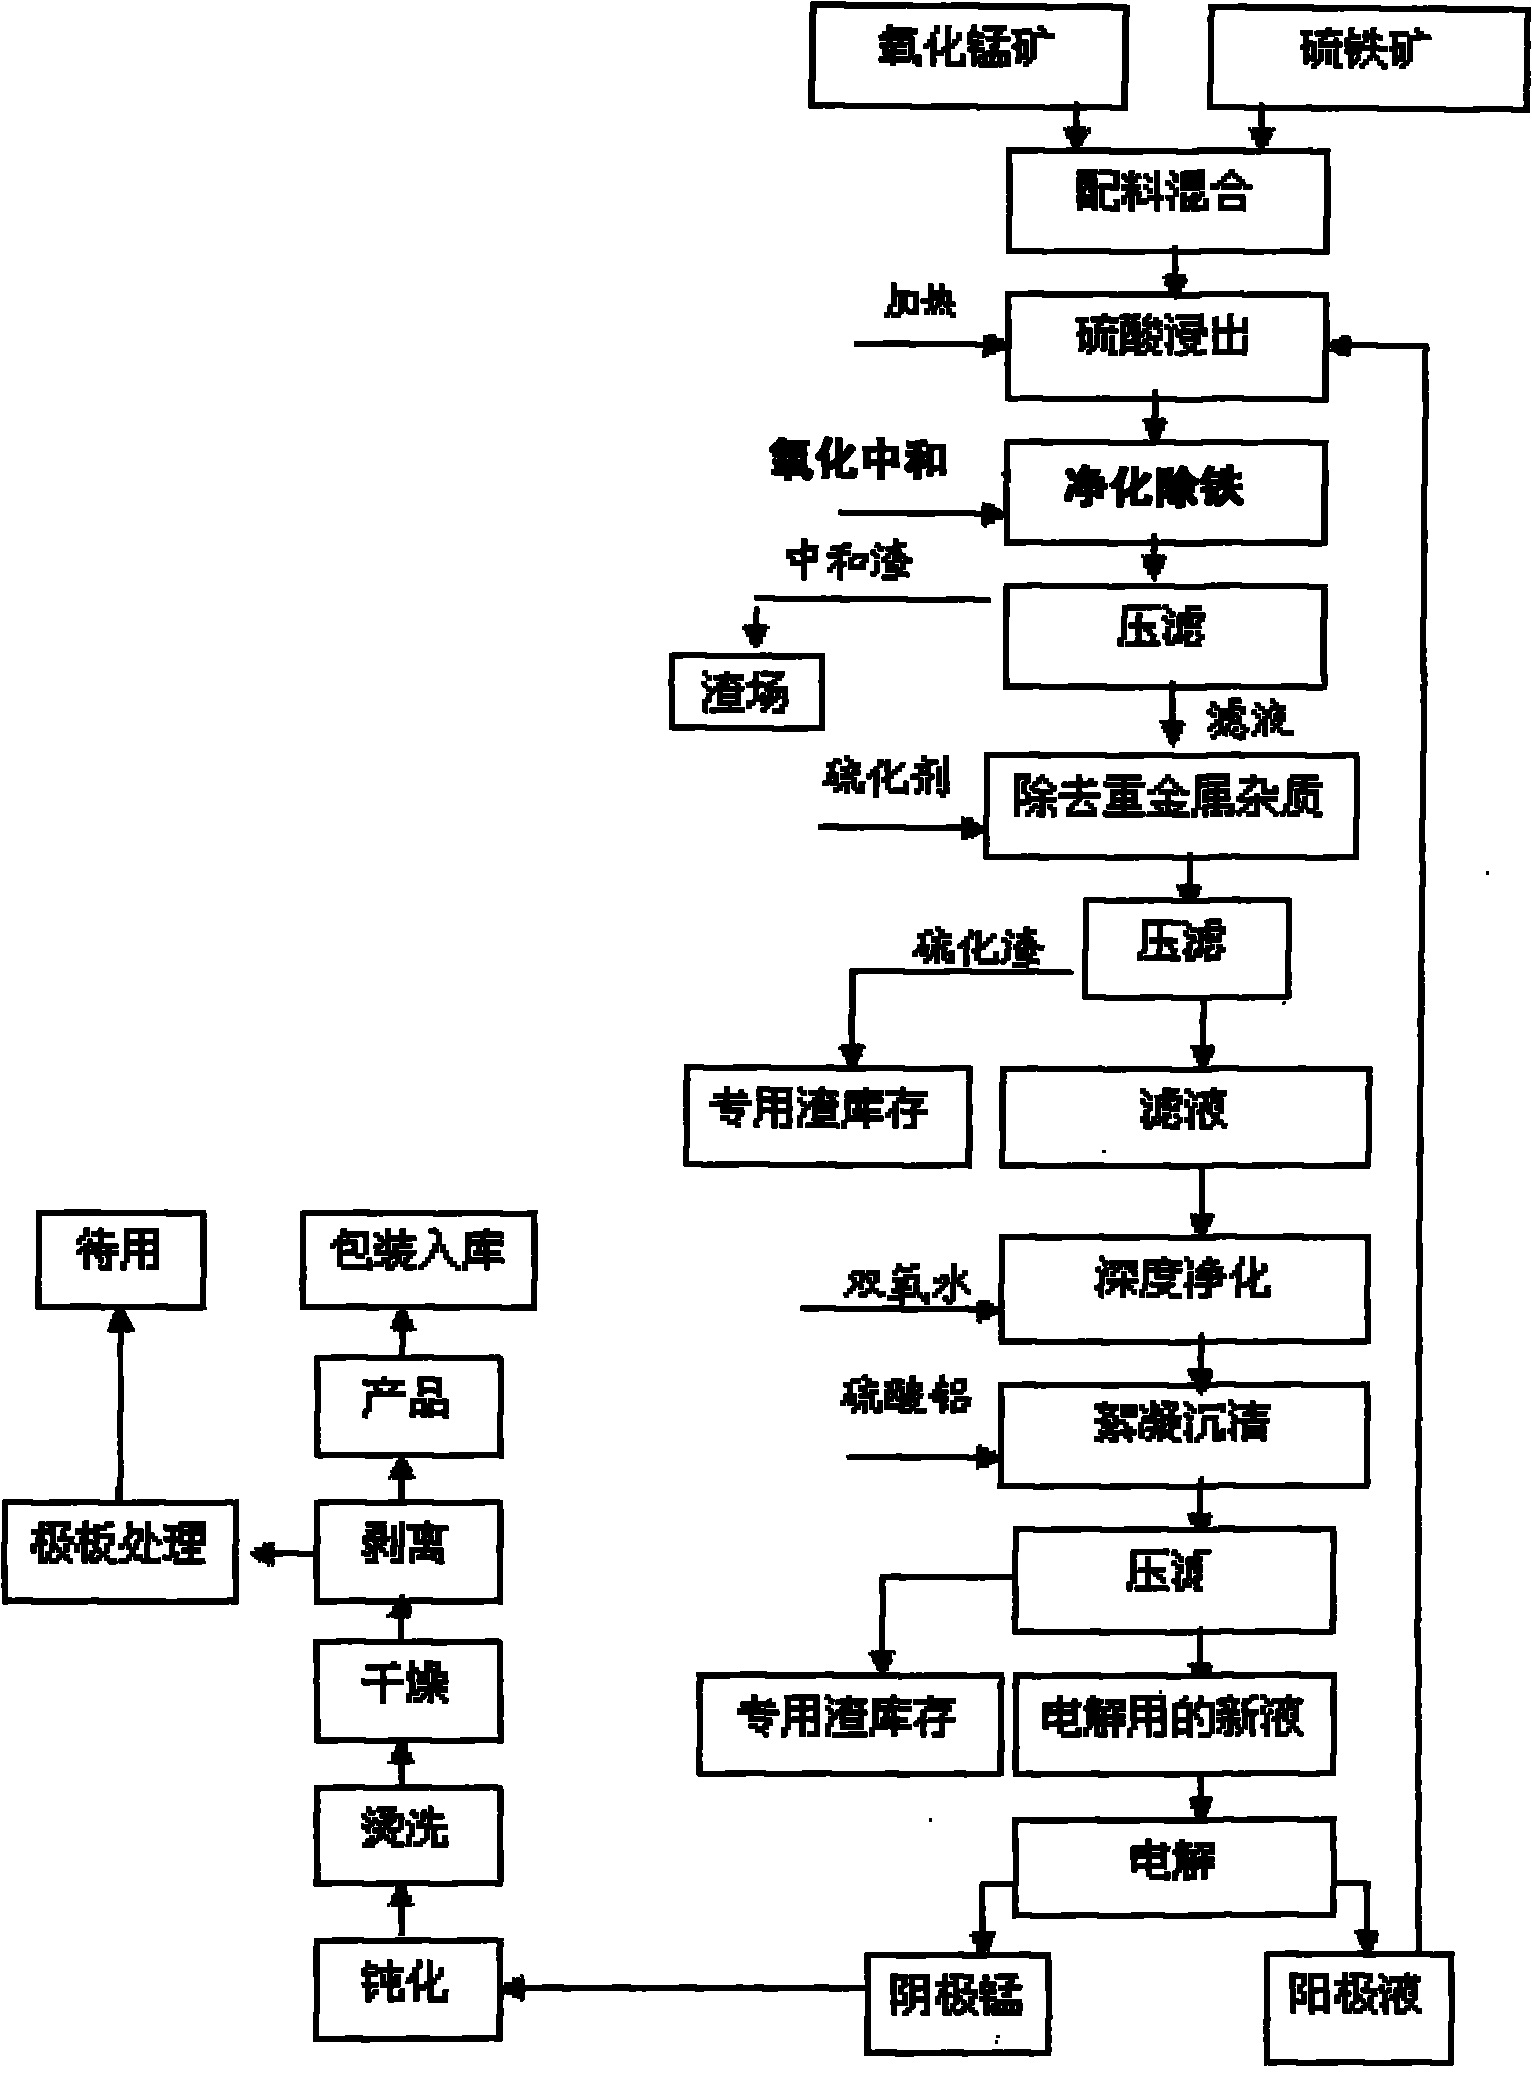 Improved device and method for producing electrolytic manganese metal by two-ore method